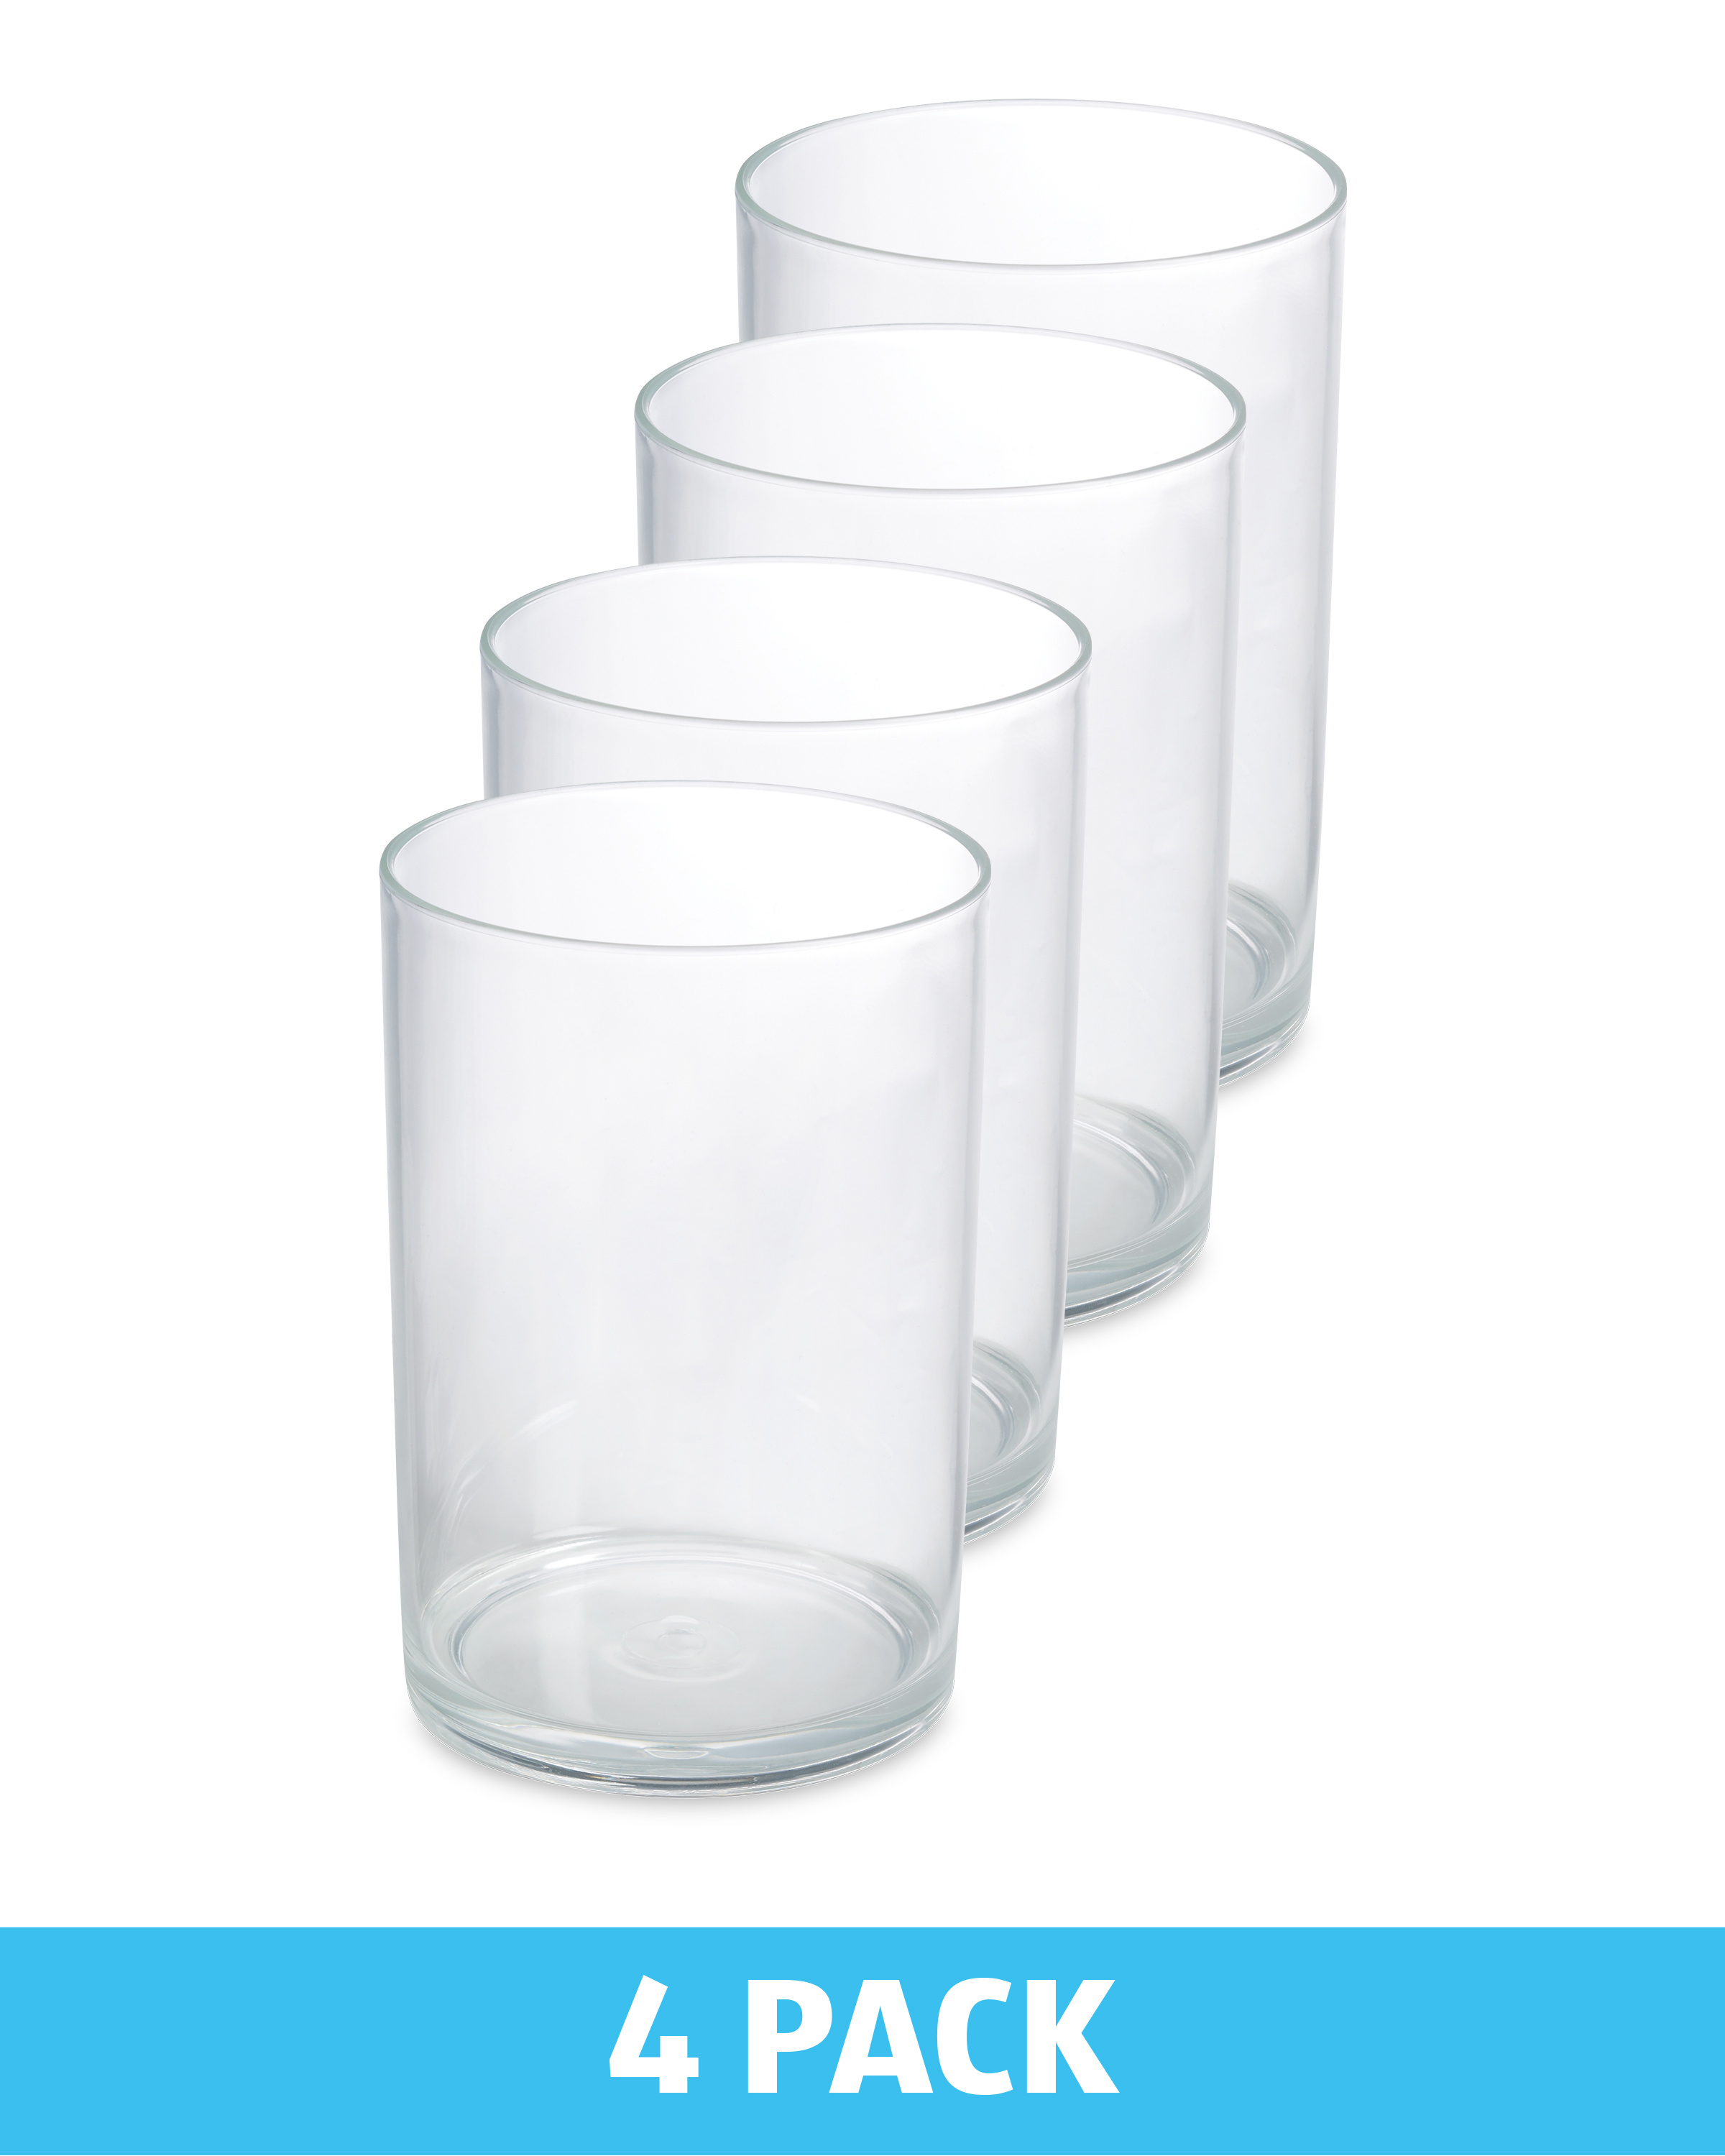 Cq acrylic 12 Pack Champagne Flute with Outer Cup 5 Stemless Clear